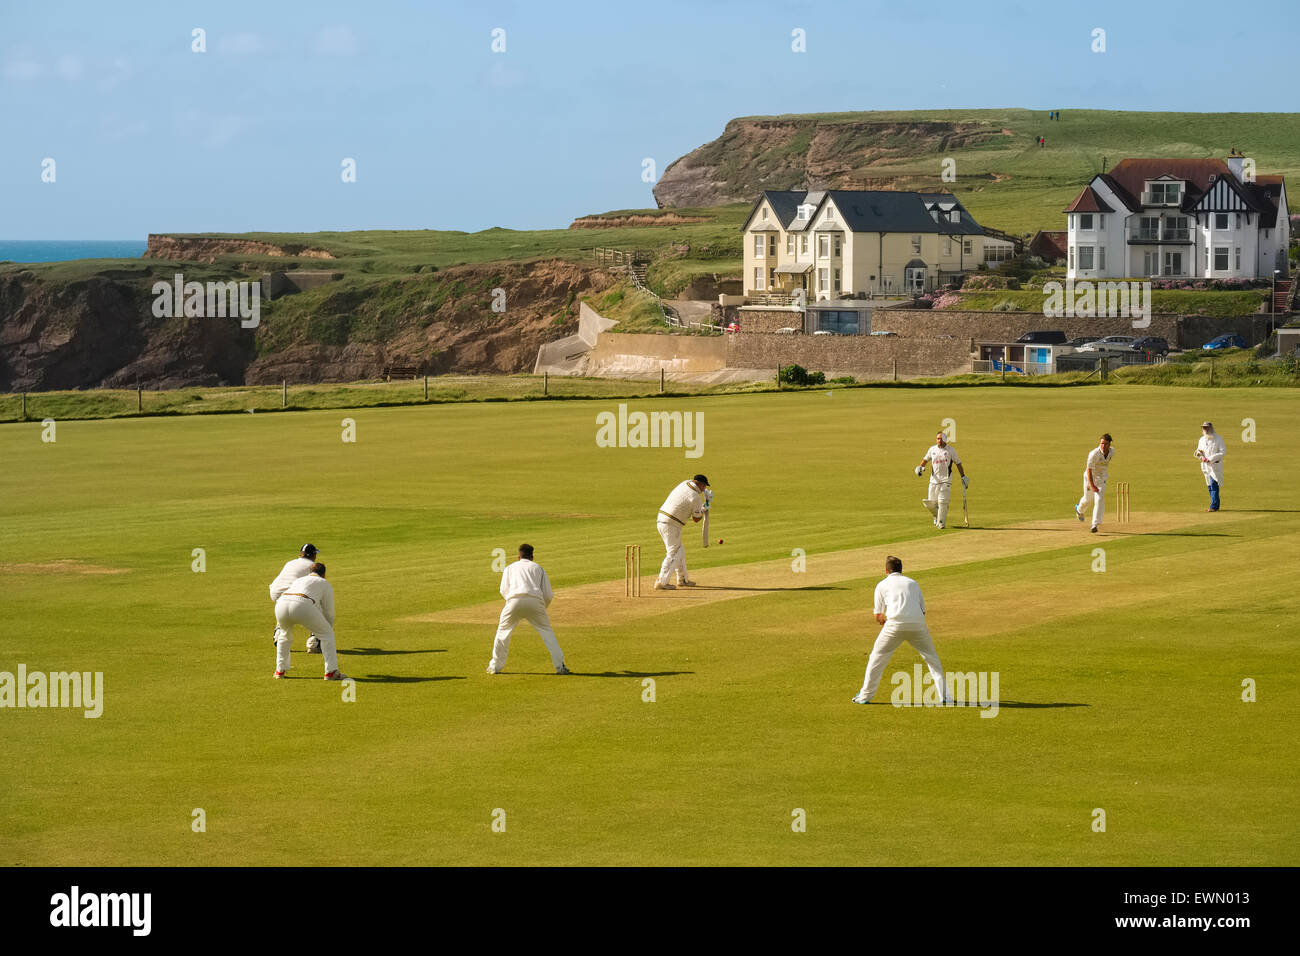 Action at Bude North Cornwall Cricket Club beside the Atlantic Ocean, England, UK Stock Photo